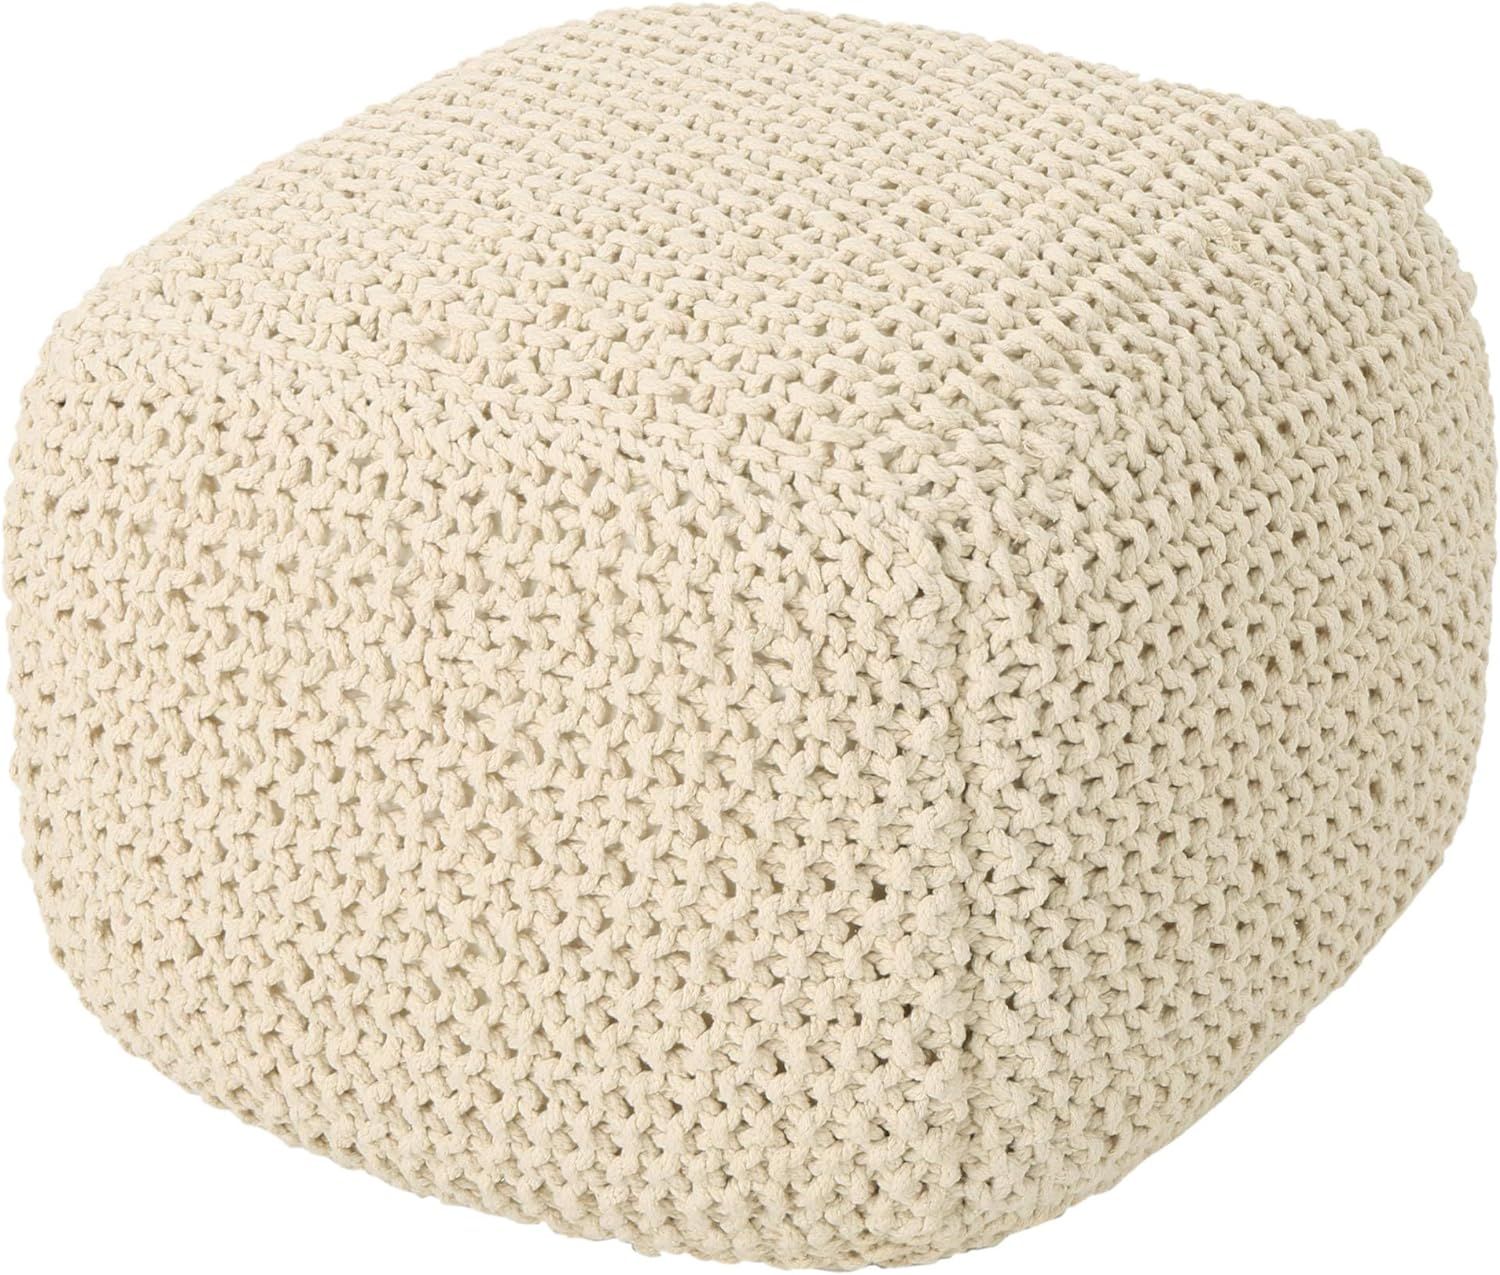 Christopher Knight Home Knox Knitted Cotton Pouf, Beige | Amazon (US)